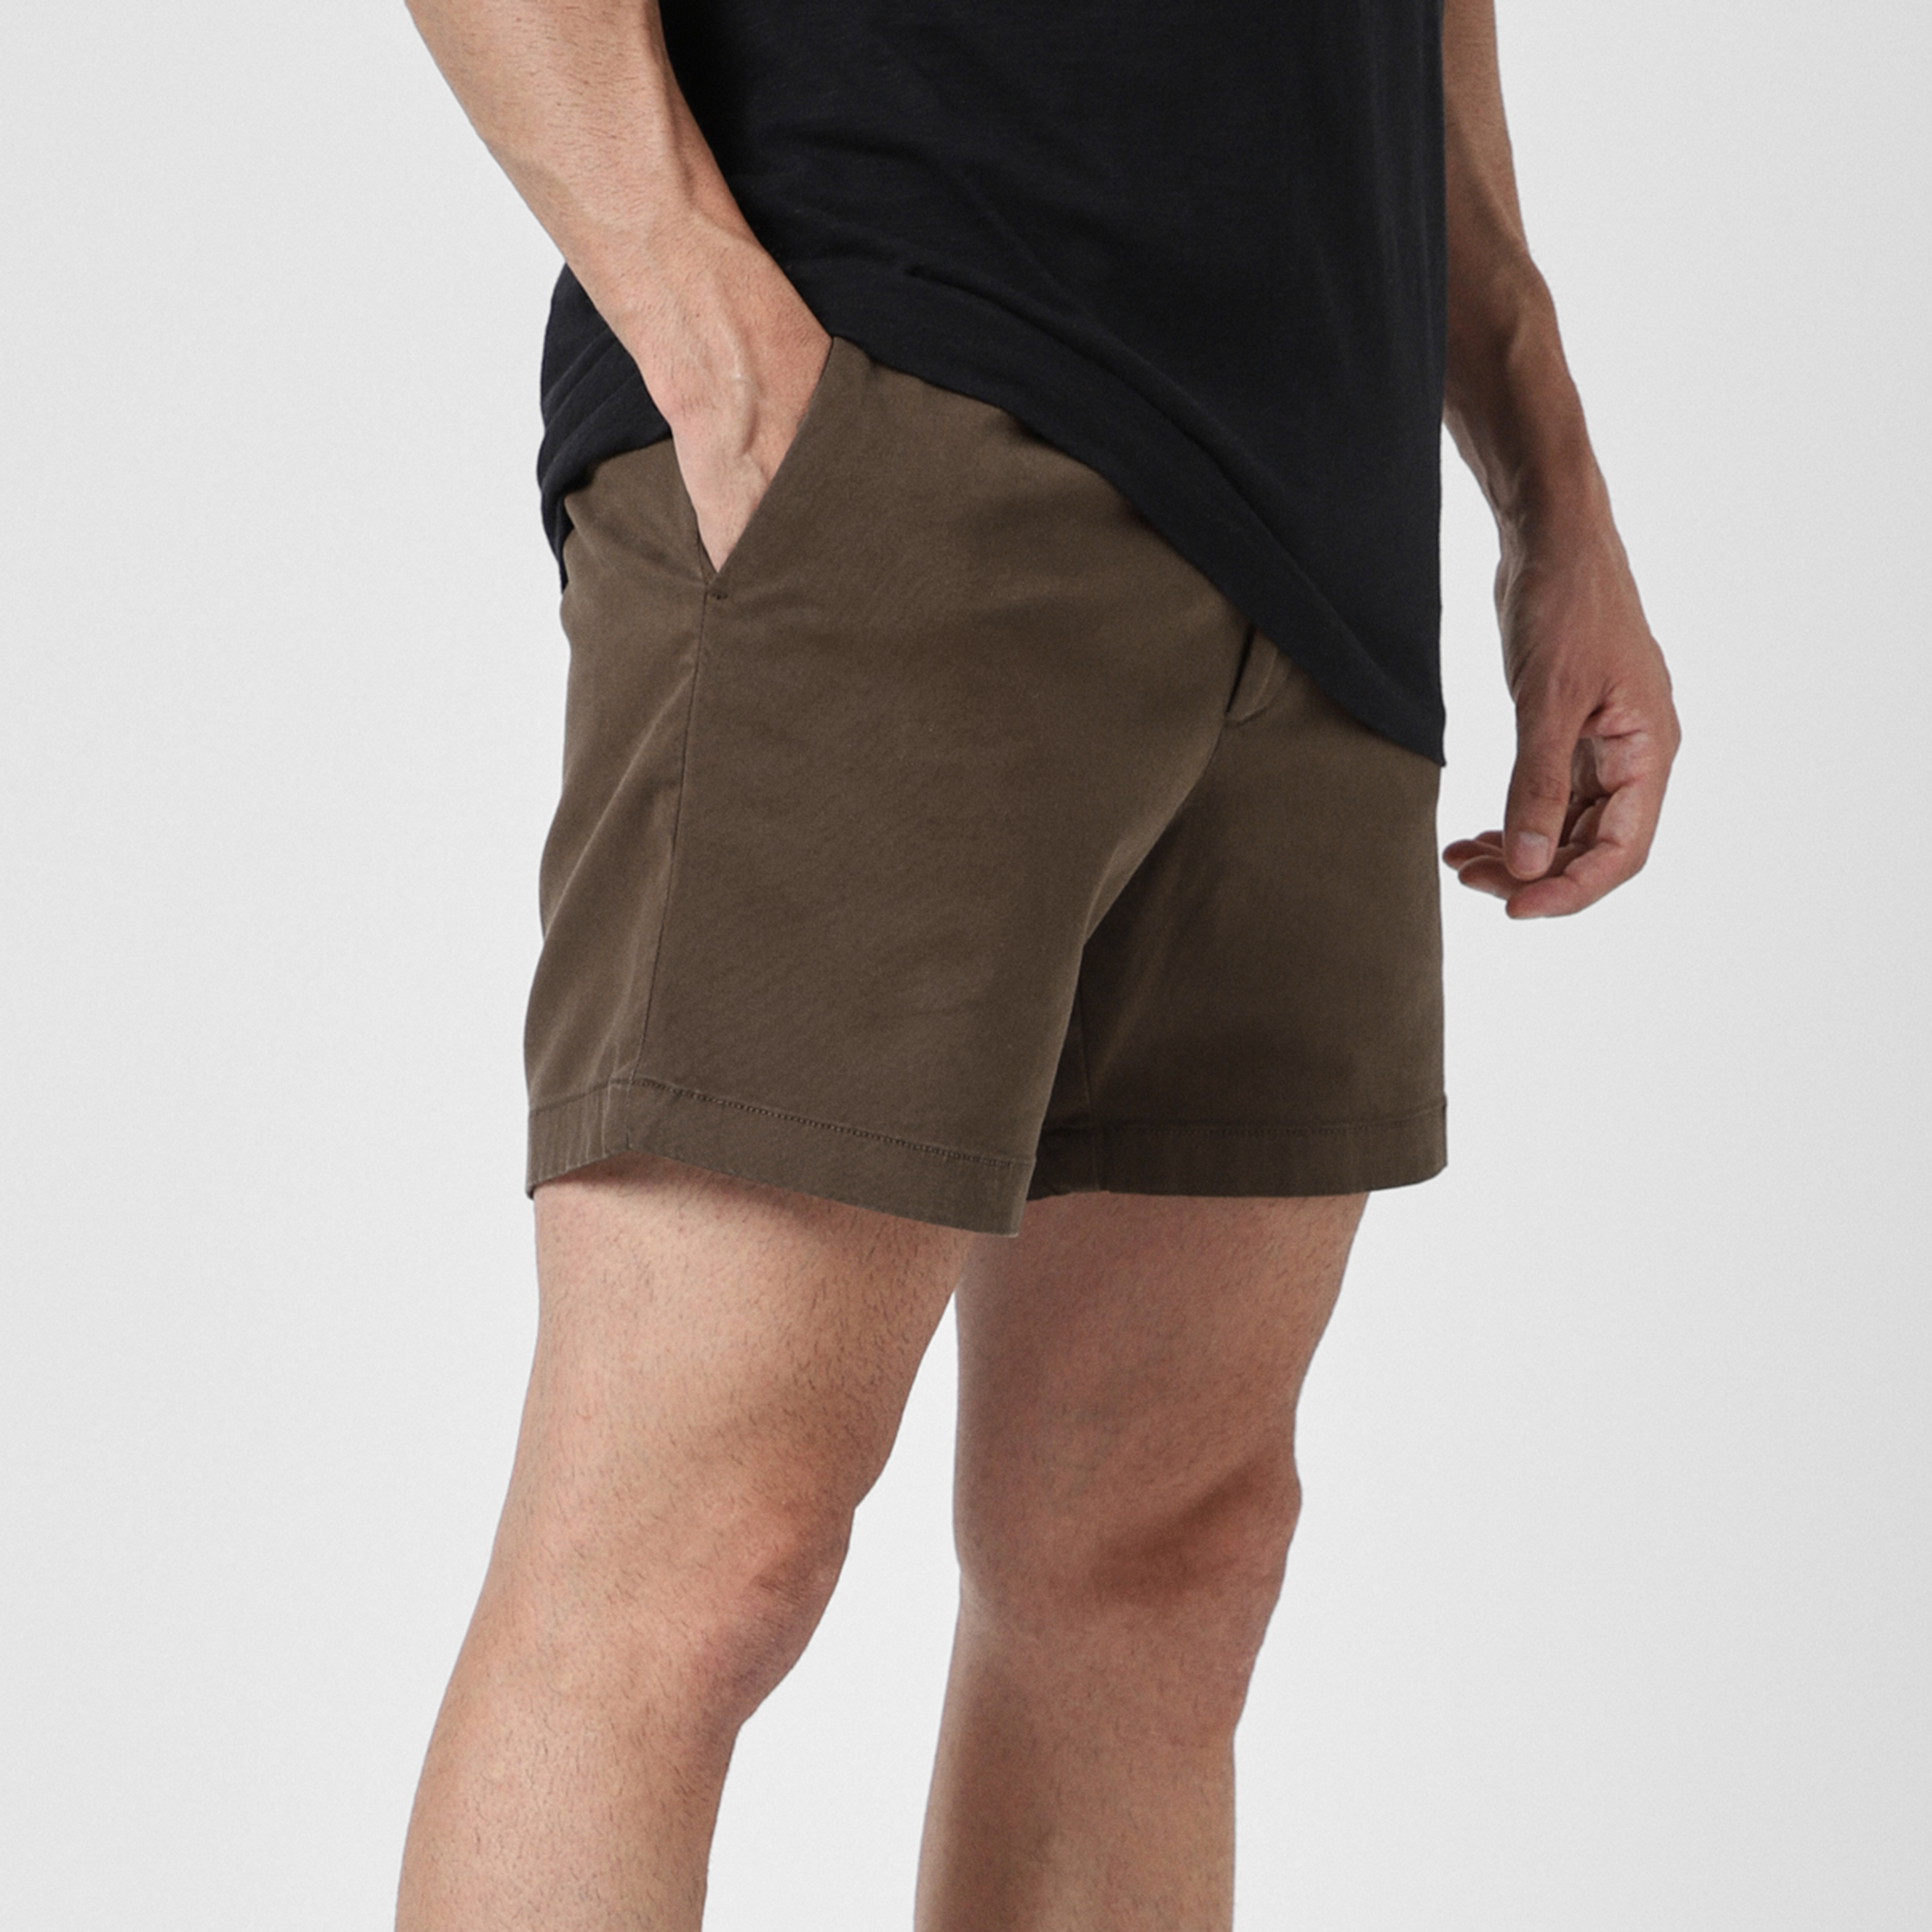 Stretch Chino Short 5.5" in Cocoa right side on model